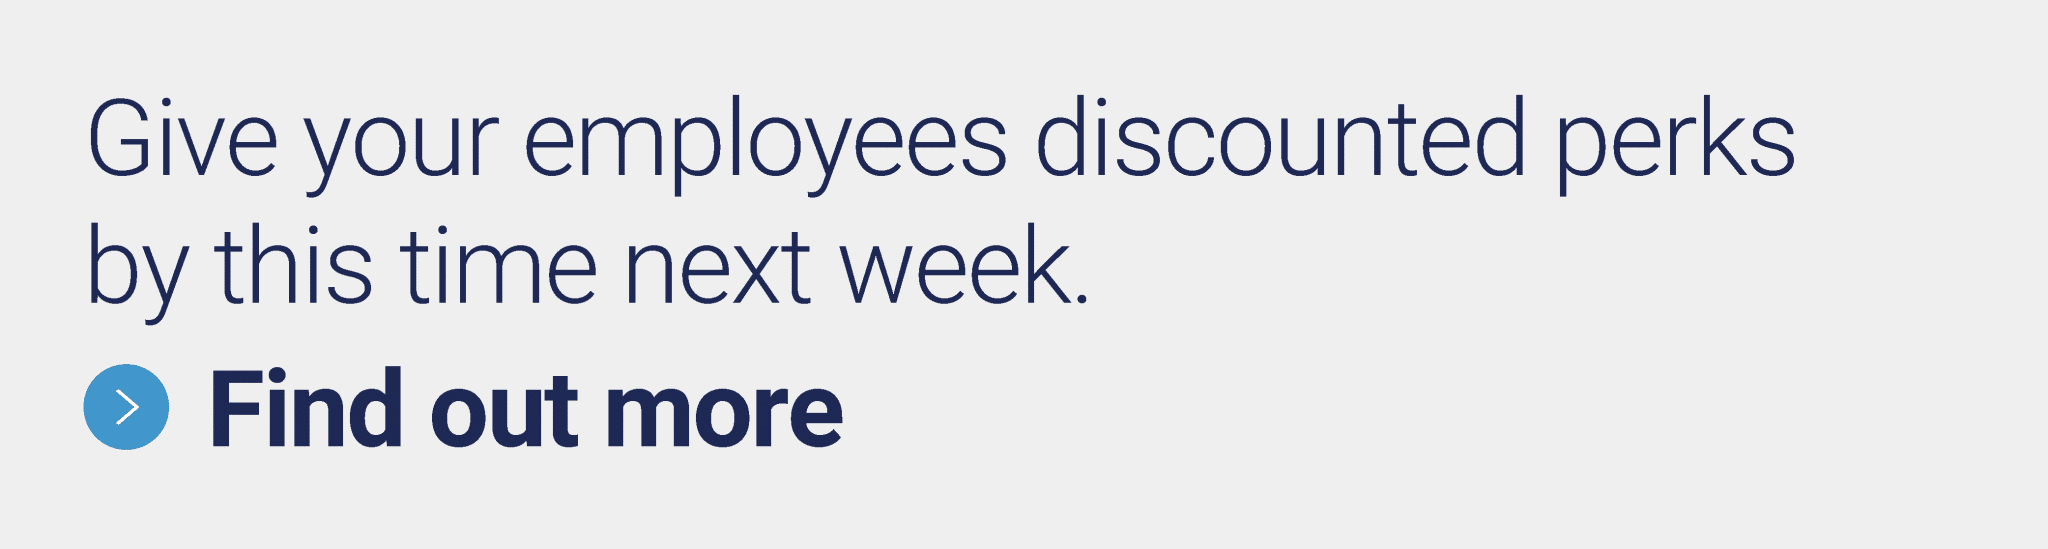 Give your employees discounted perks by this time next week. Find out more